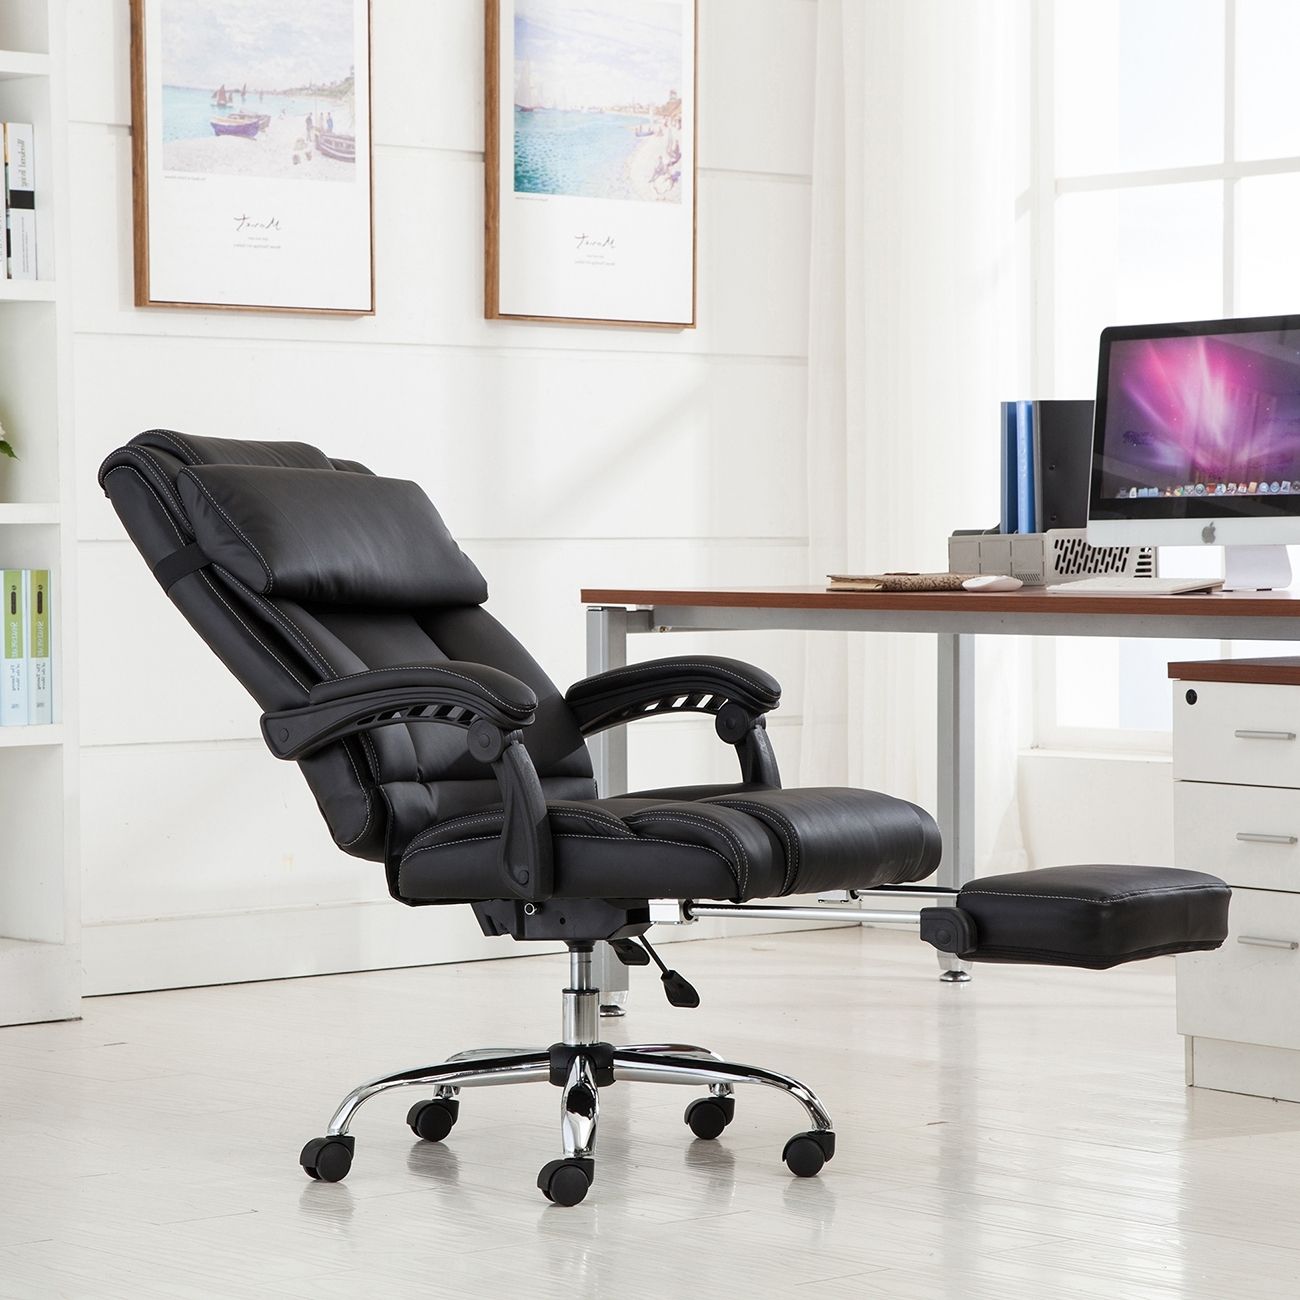 Best And Newest Executive Reclining Office Chair Ergonomic High Back Leather Pertaining To Executive Office Chairs Reclining (View 12 of 20)